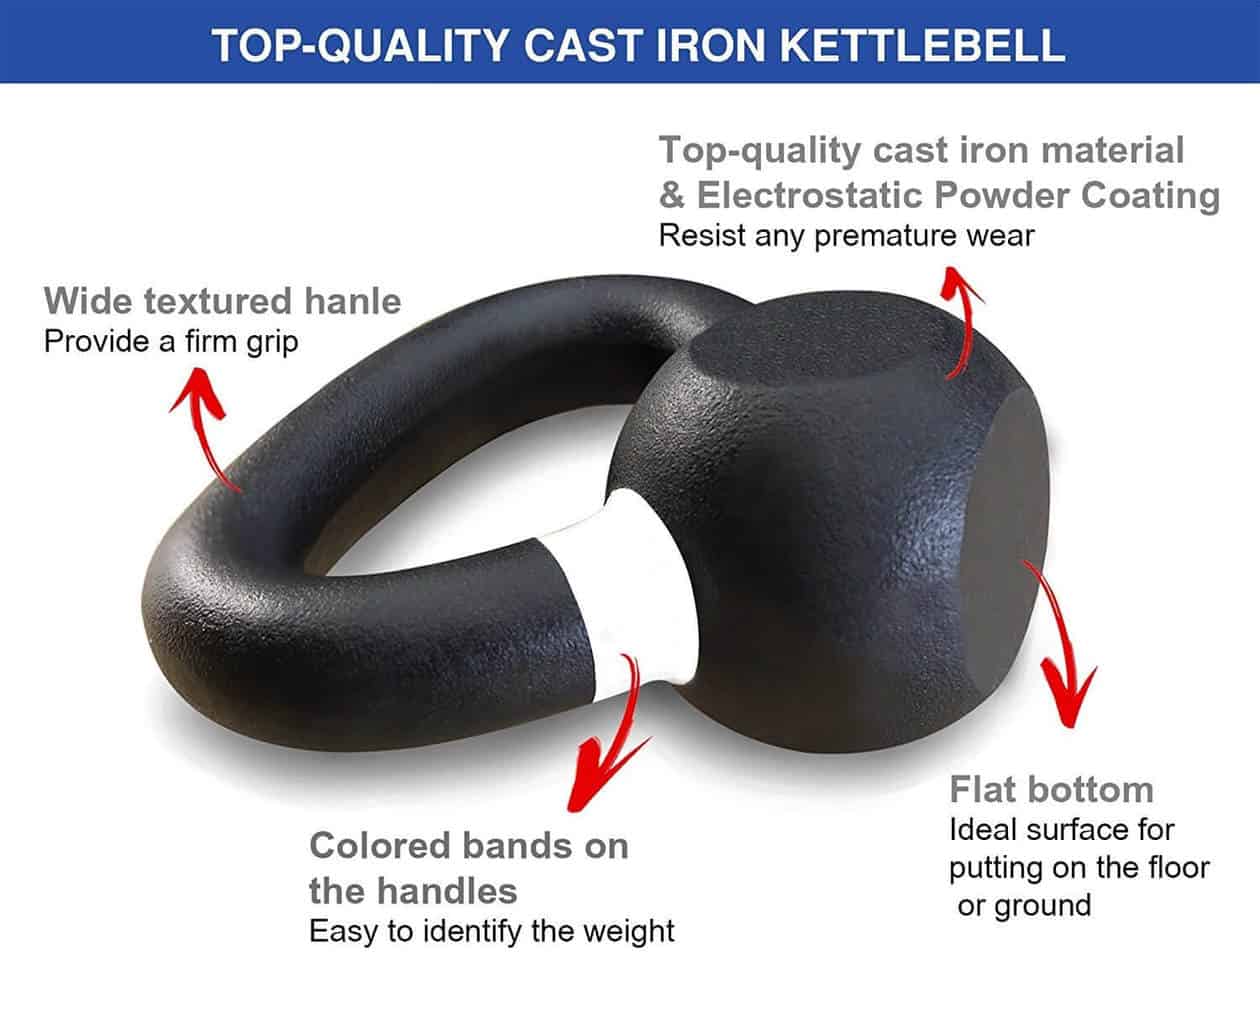 KOBO-cast-iron-kettlebell-for-strength-and-conditioning-fitness